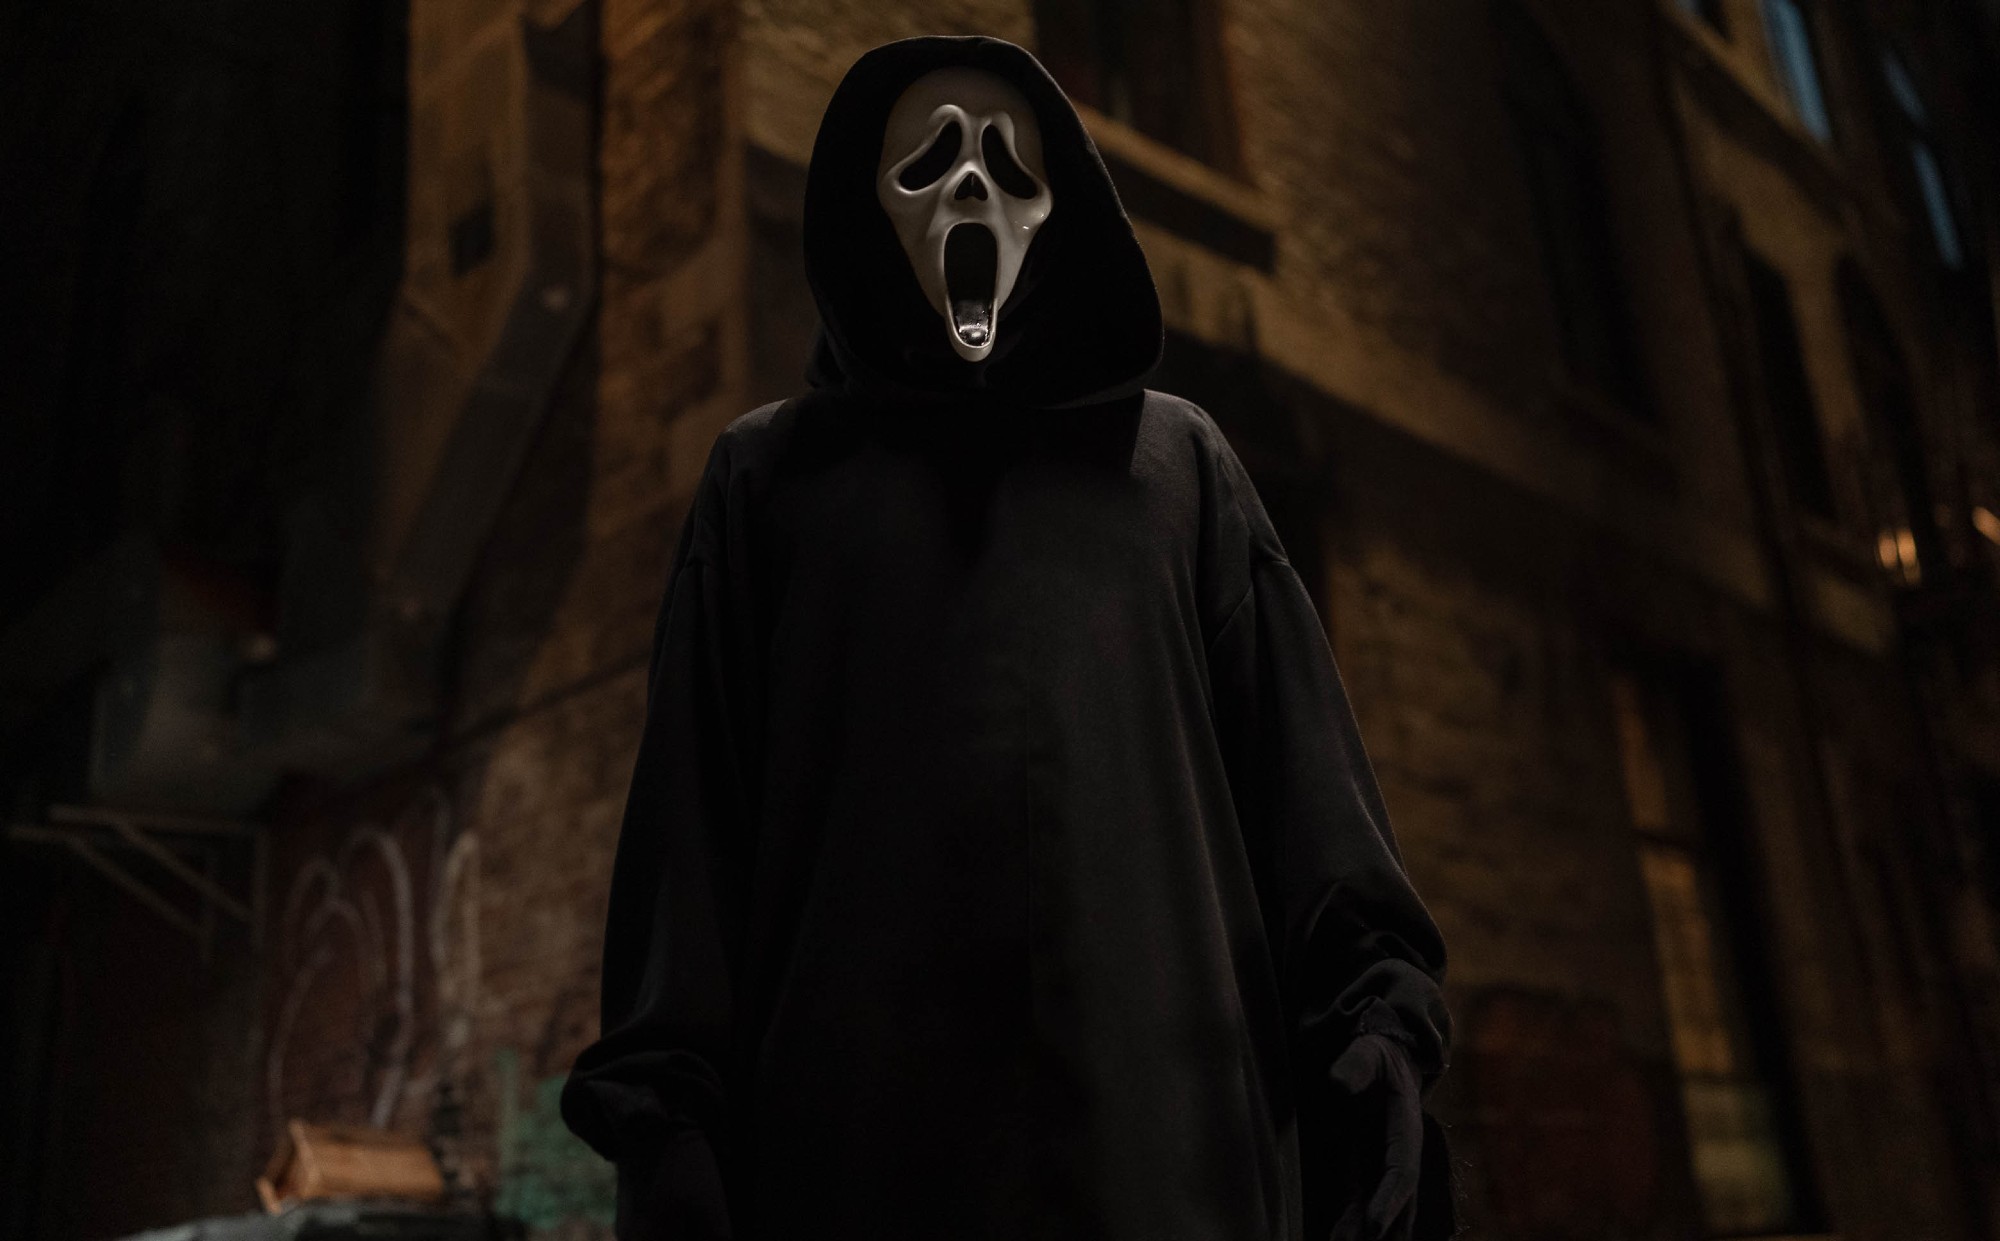 Scream 6 Trailer Shows an All-Out War Between Ghostface and Their Victims -  IGN